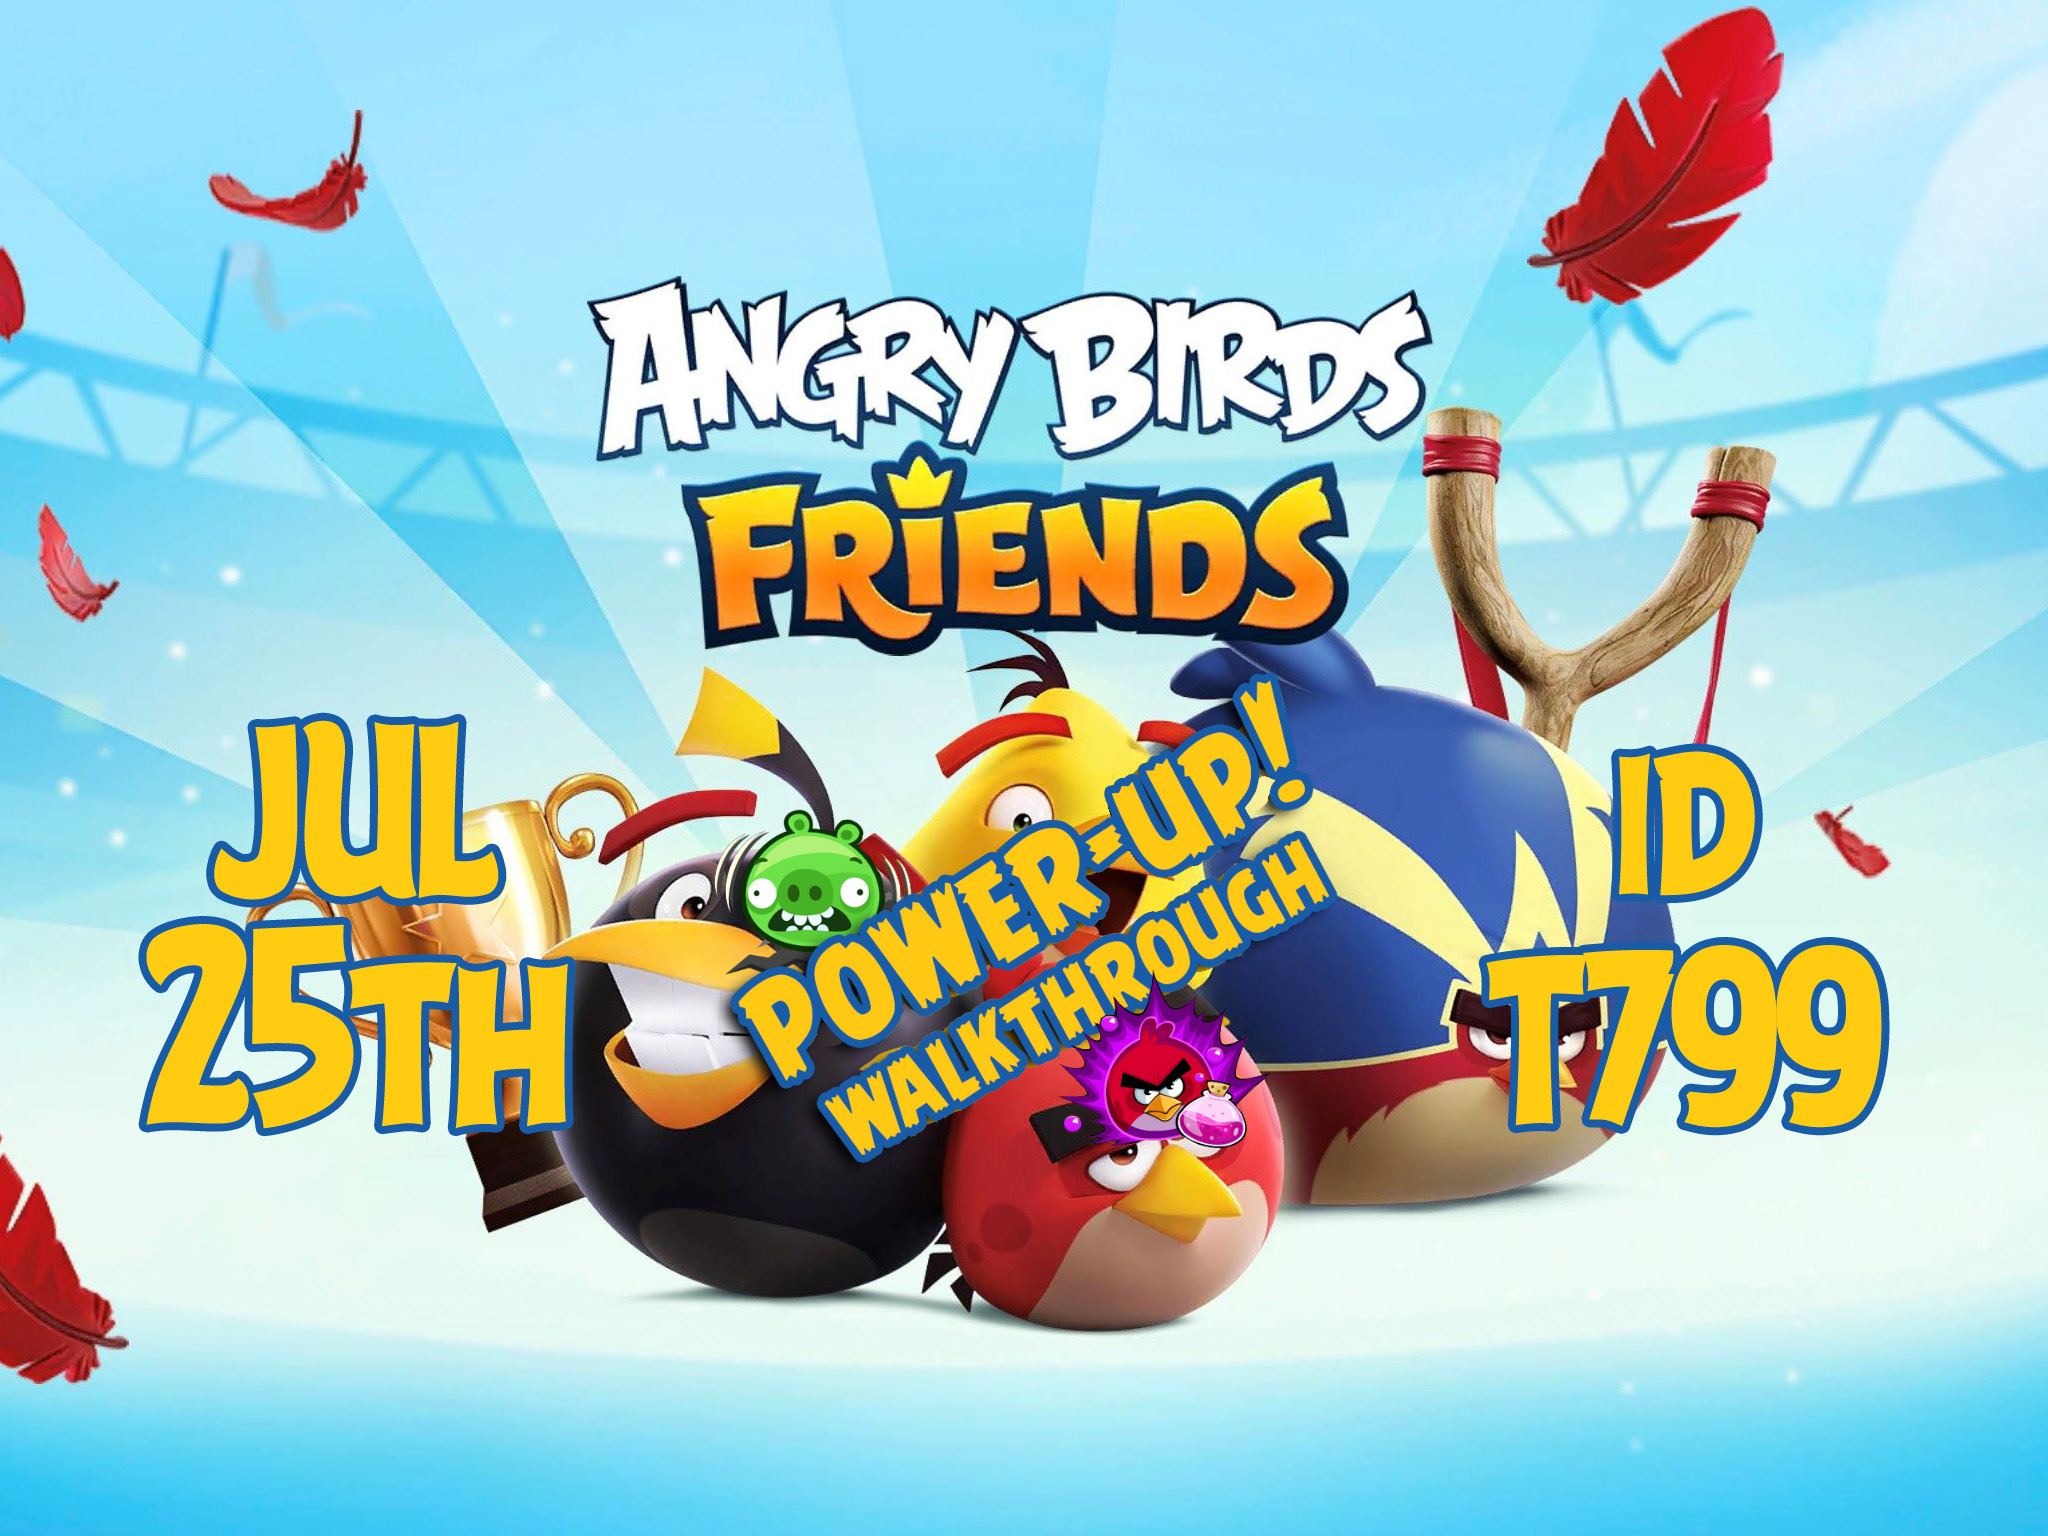 Angry-Birds-Friends-Tournament-T799-Feature-Image-PU